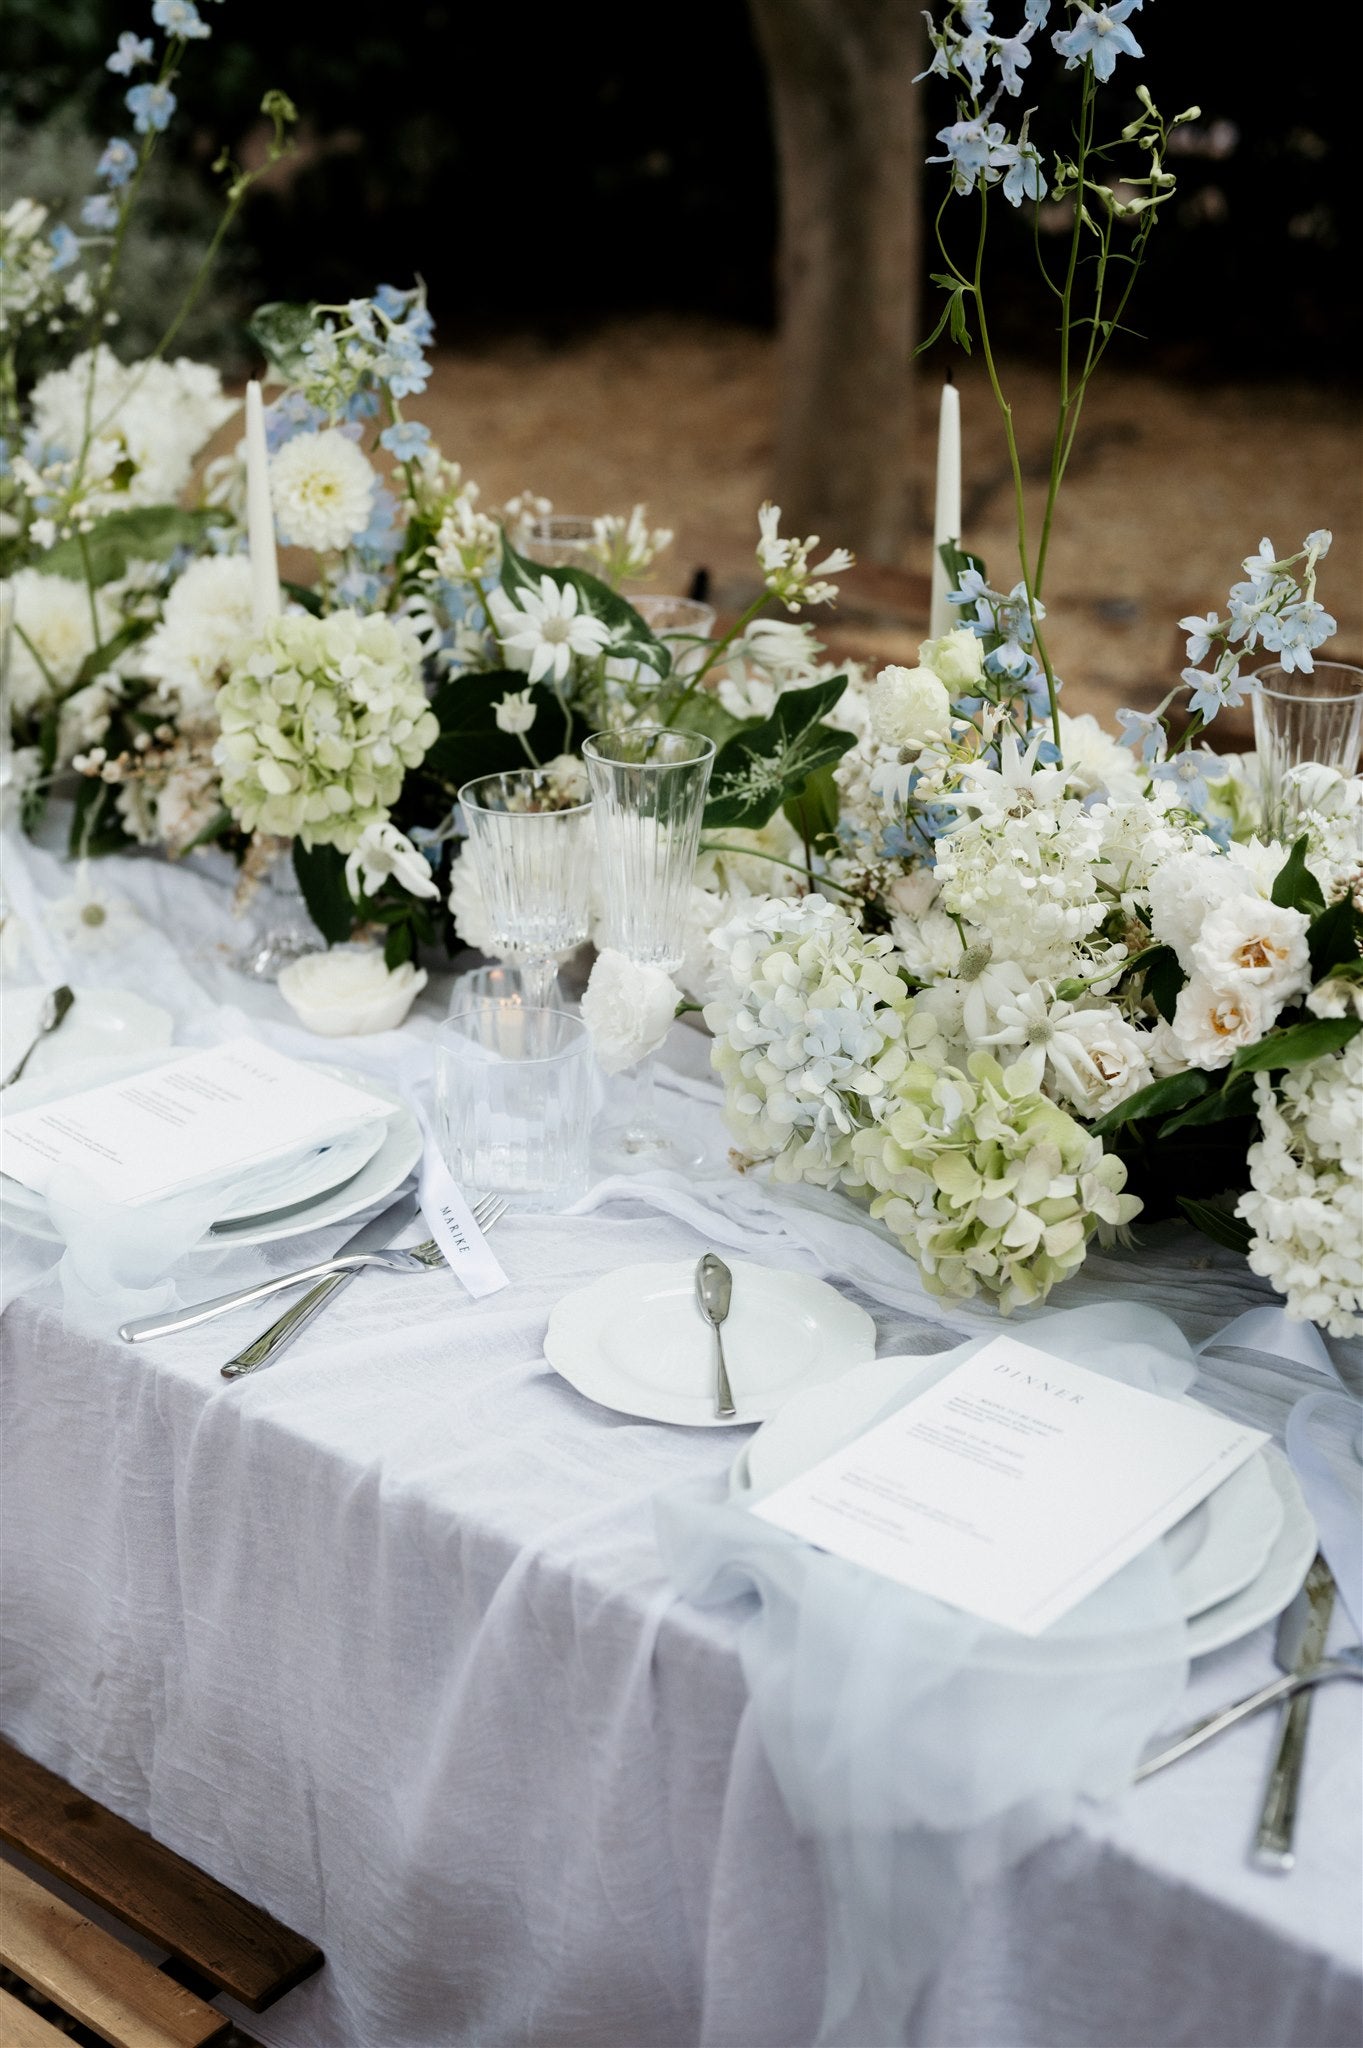 Textured cotton overlay for hire - table draping in white |For Love & Living Gold Coast Wedding & Events Hire